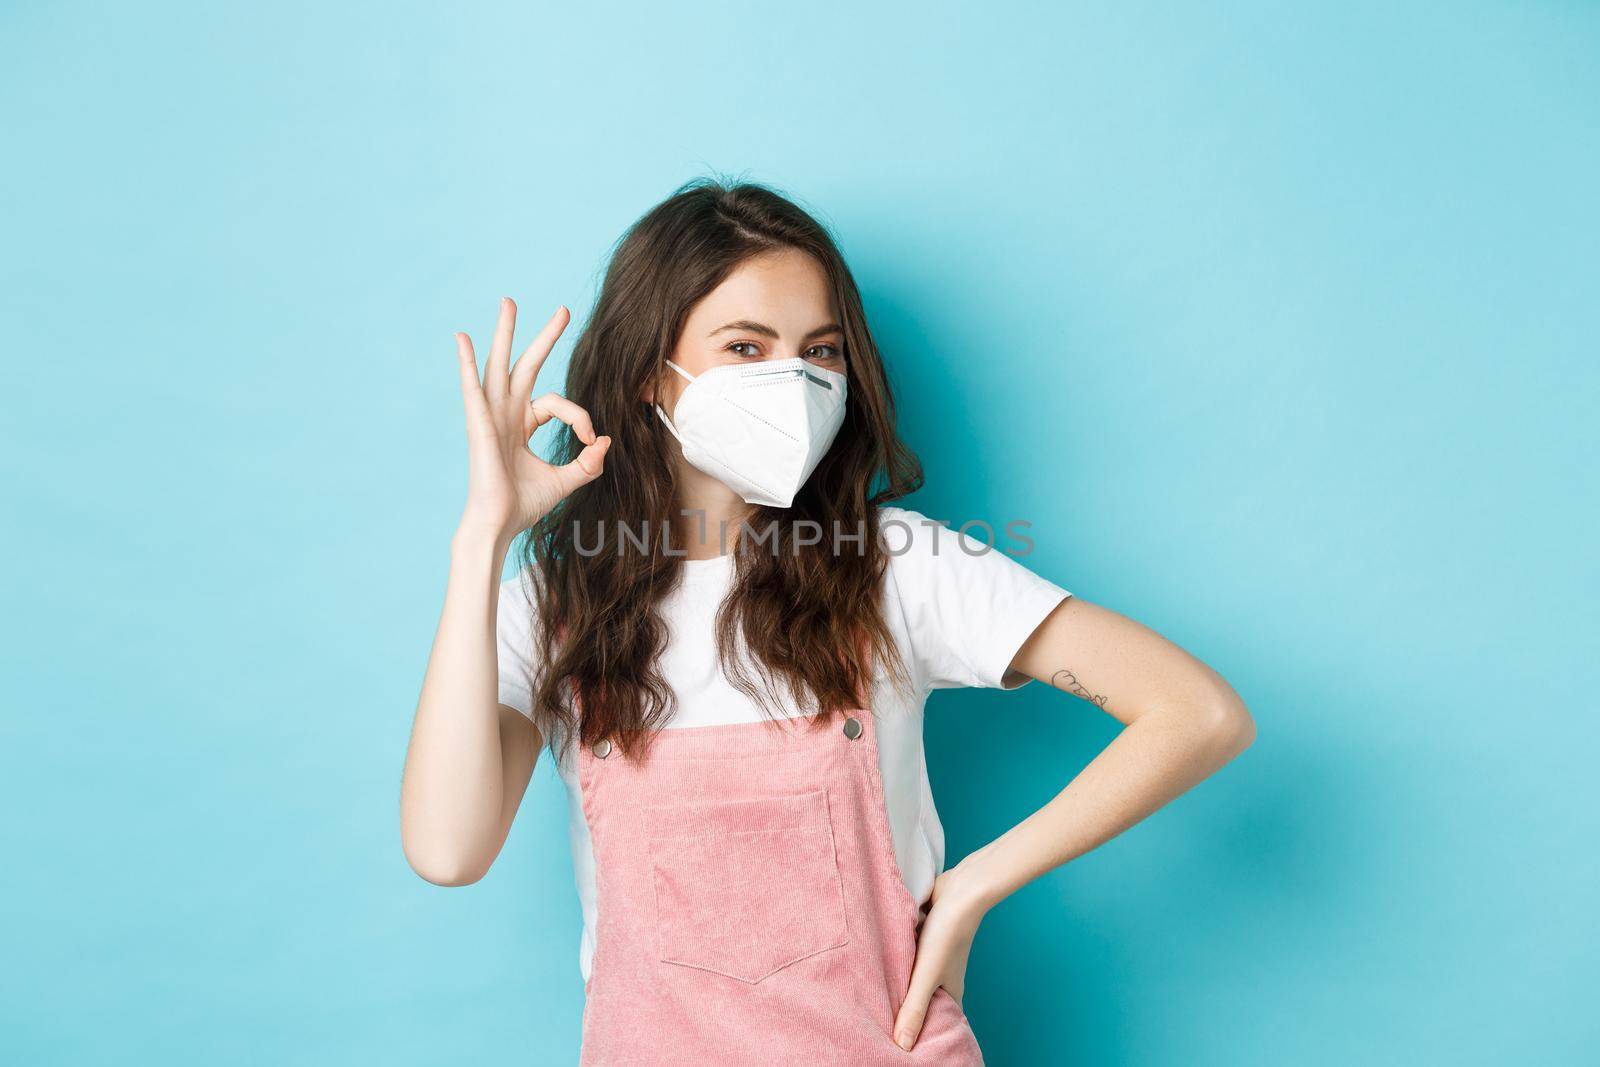 Covid, health and pandemic concept. Very good. Young supportive woman wearing medical respirator and showing okay sign in approval, praise wearing face masks in public, blue background.